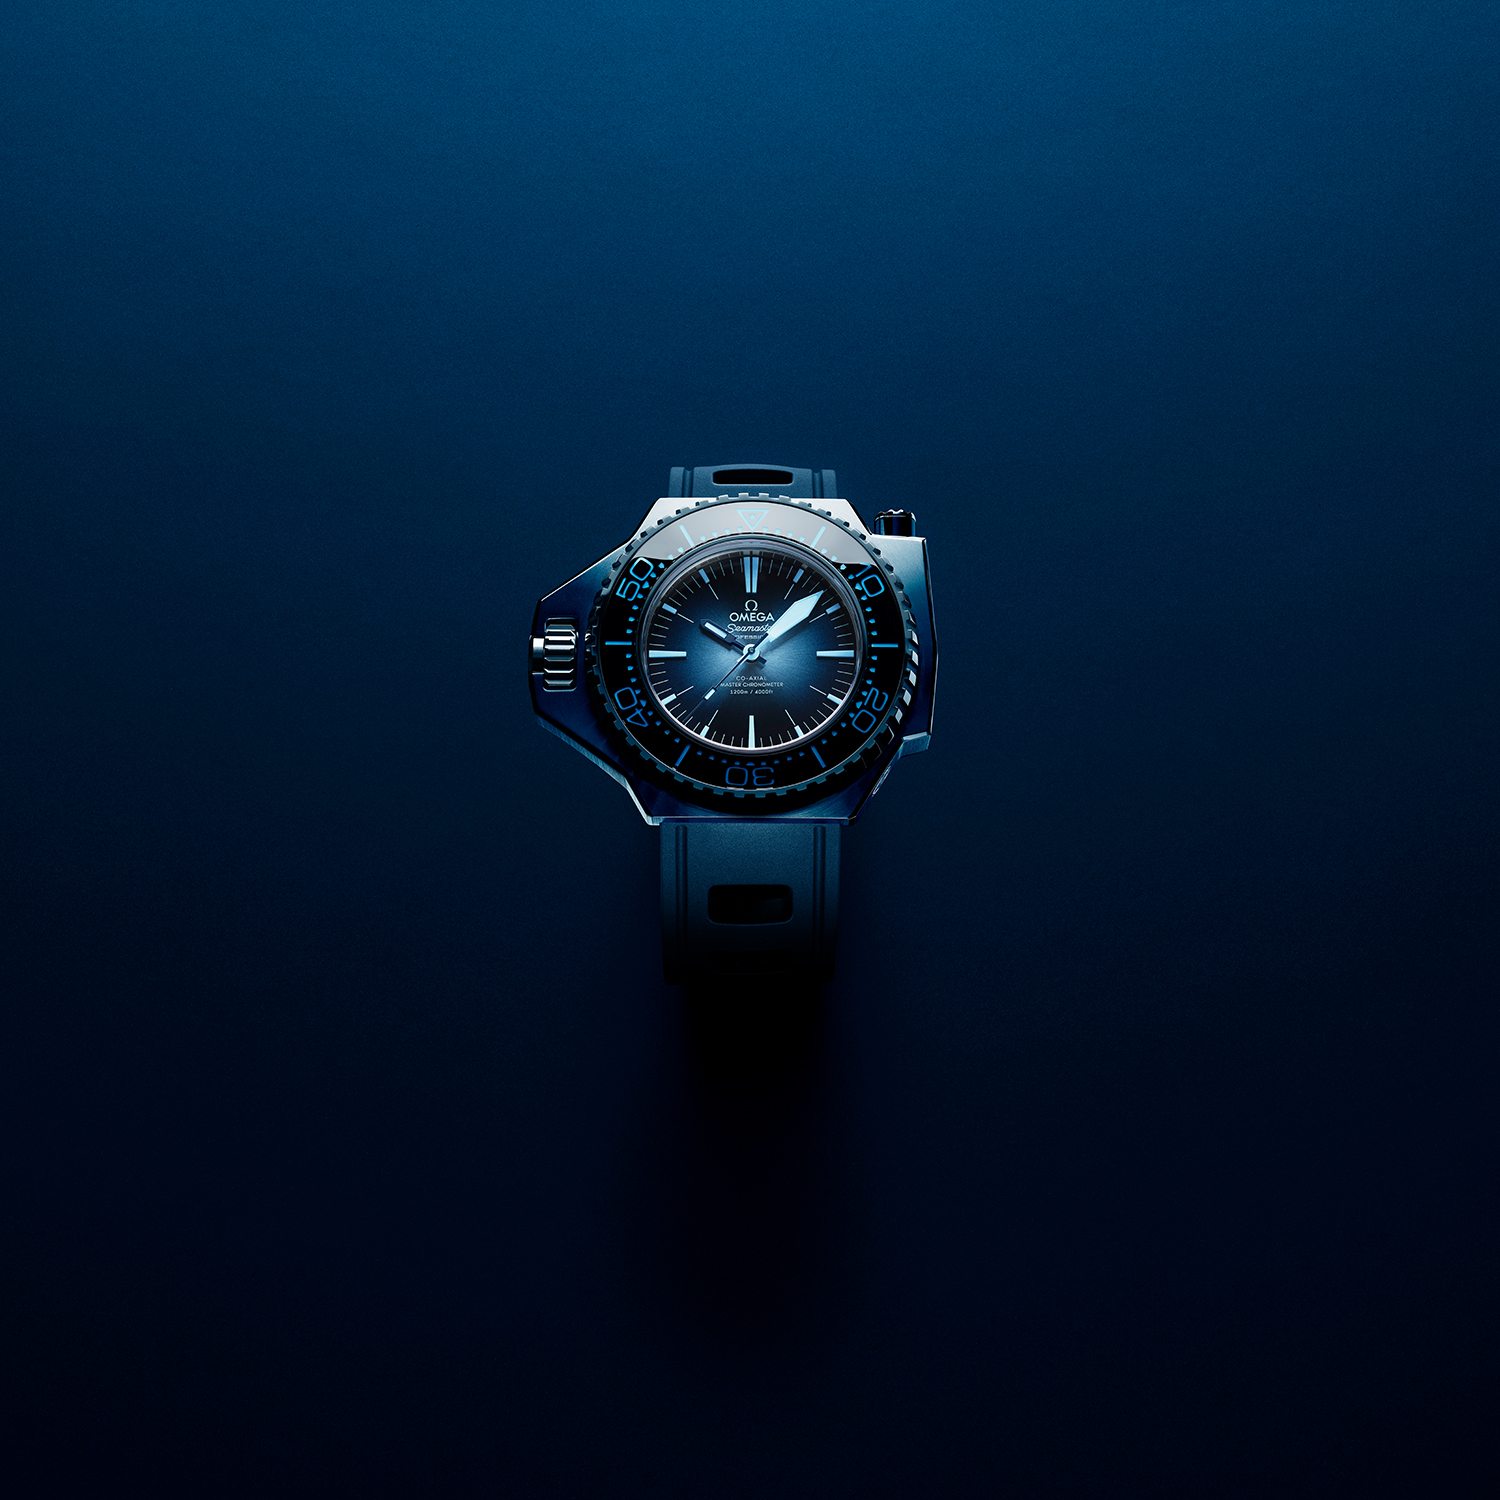 The Omega Seamaster Summer Blue Demonstrates Precision at Every Level